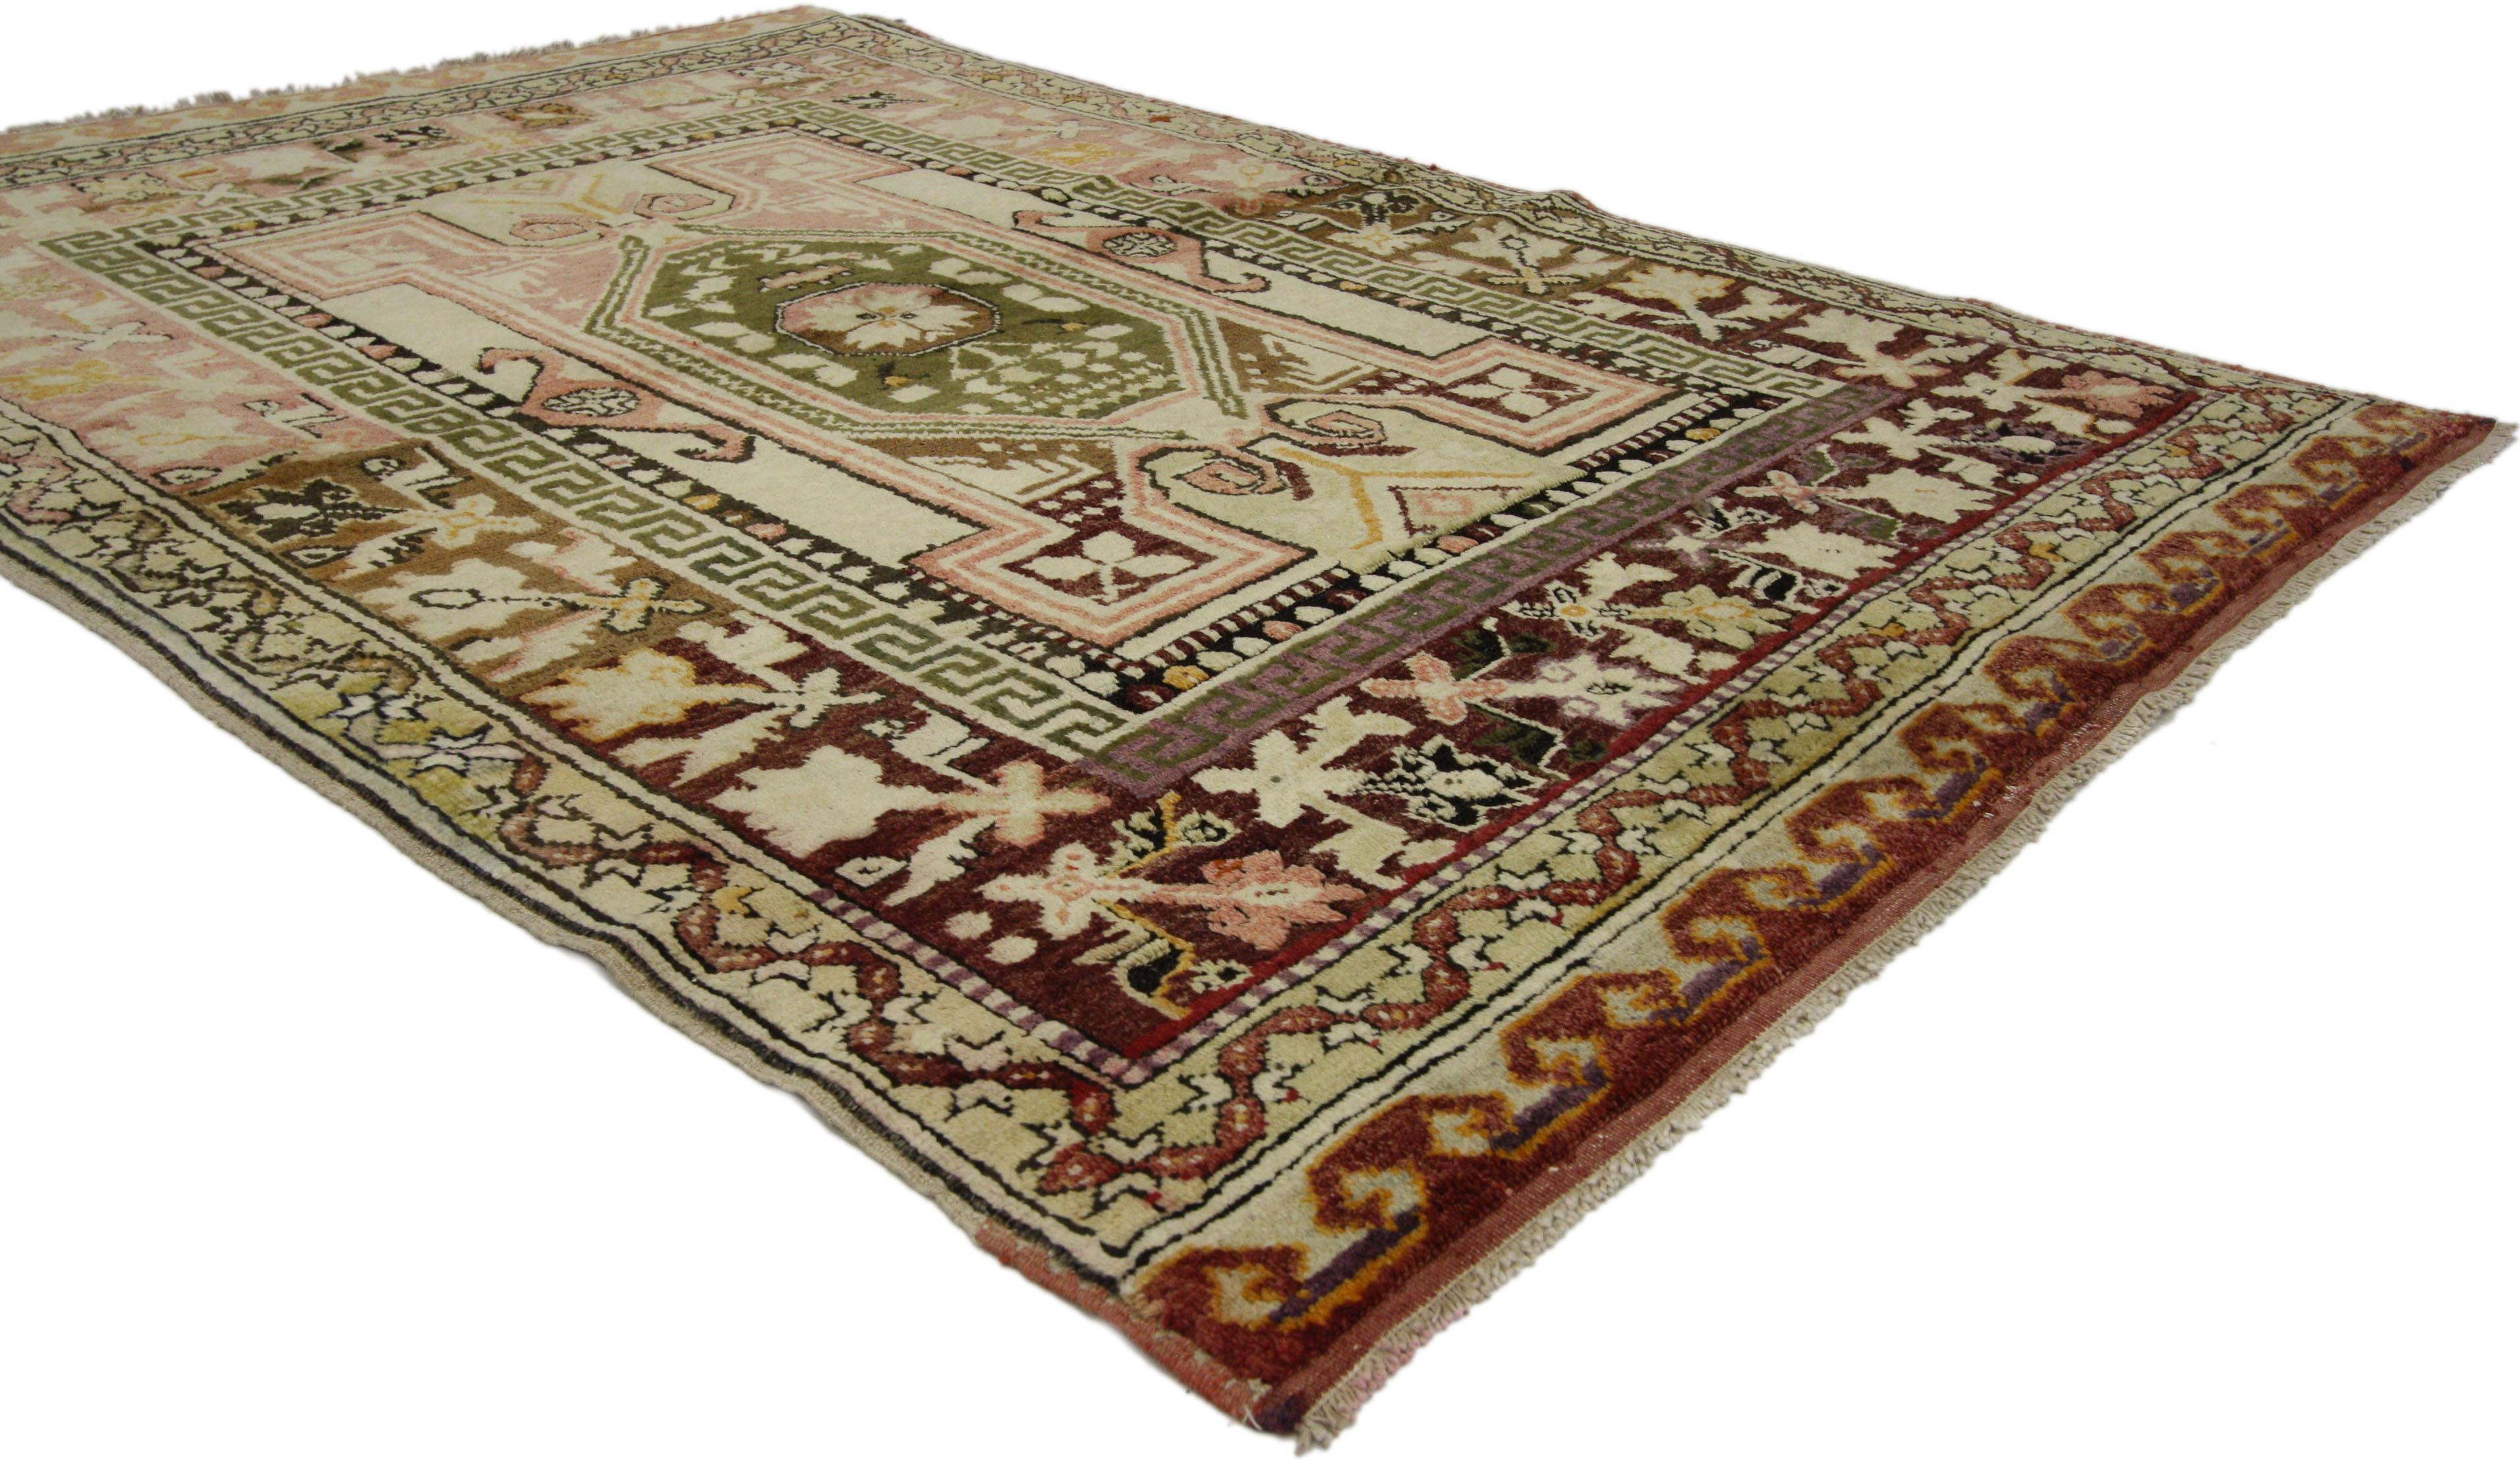 50906 Vintage Turkish Oushak Rug with Modern Style. Give your home modern style with the dynamic and dramatic look found in this vintage Turkish Oushak rug. This Turkish Oushak rug bears a remarkable air of chic sophistication with its modern style